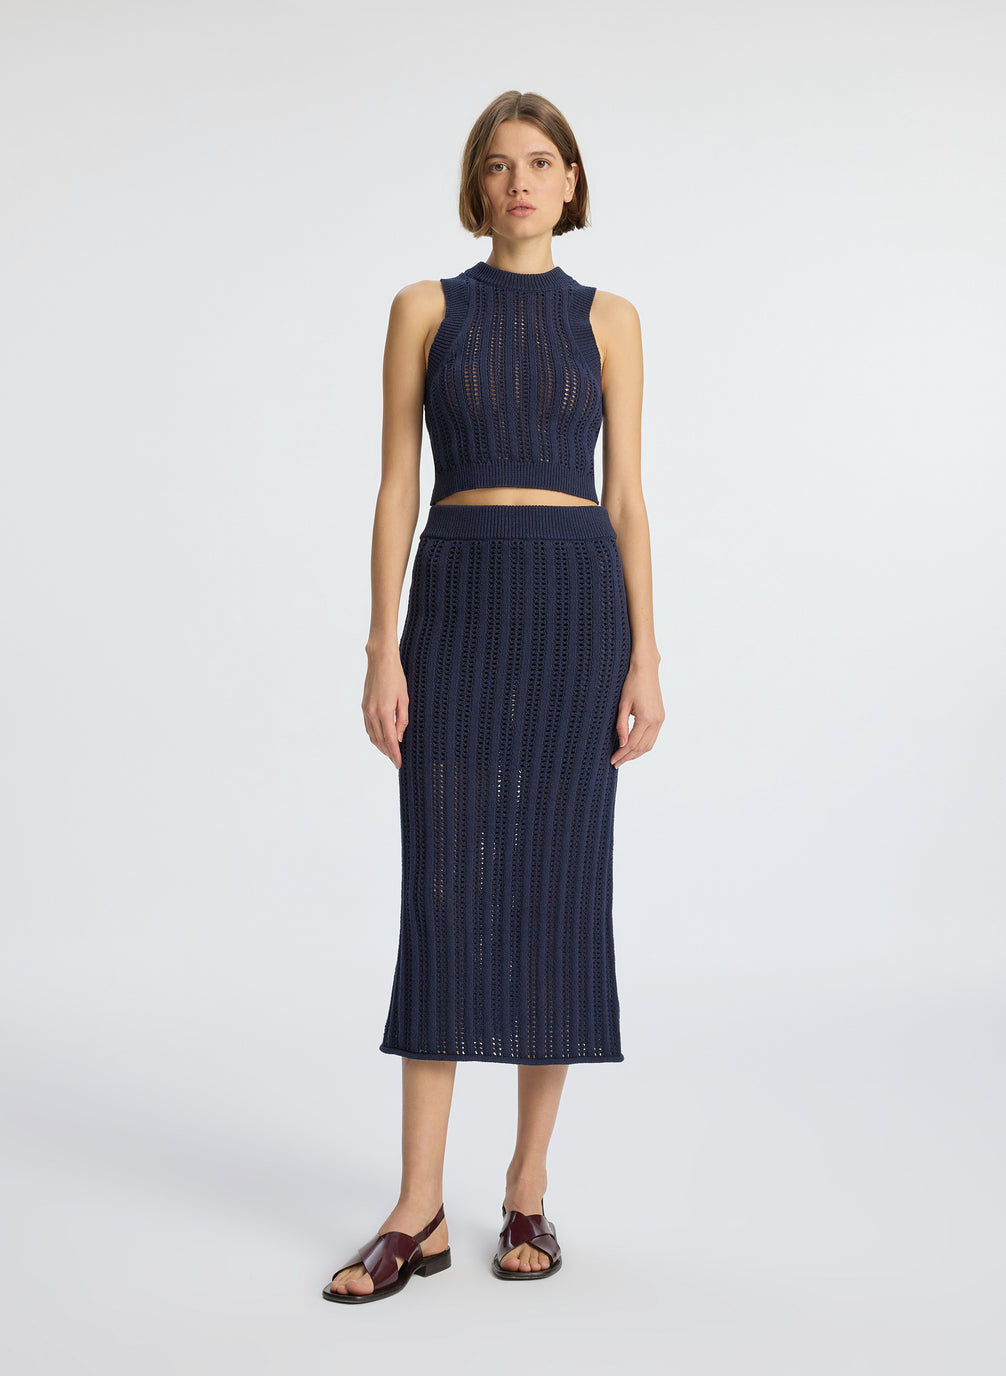 front  view of woman wearing navy blue woven tank top and matching midi skirt